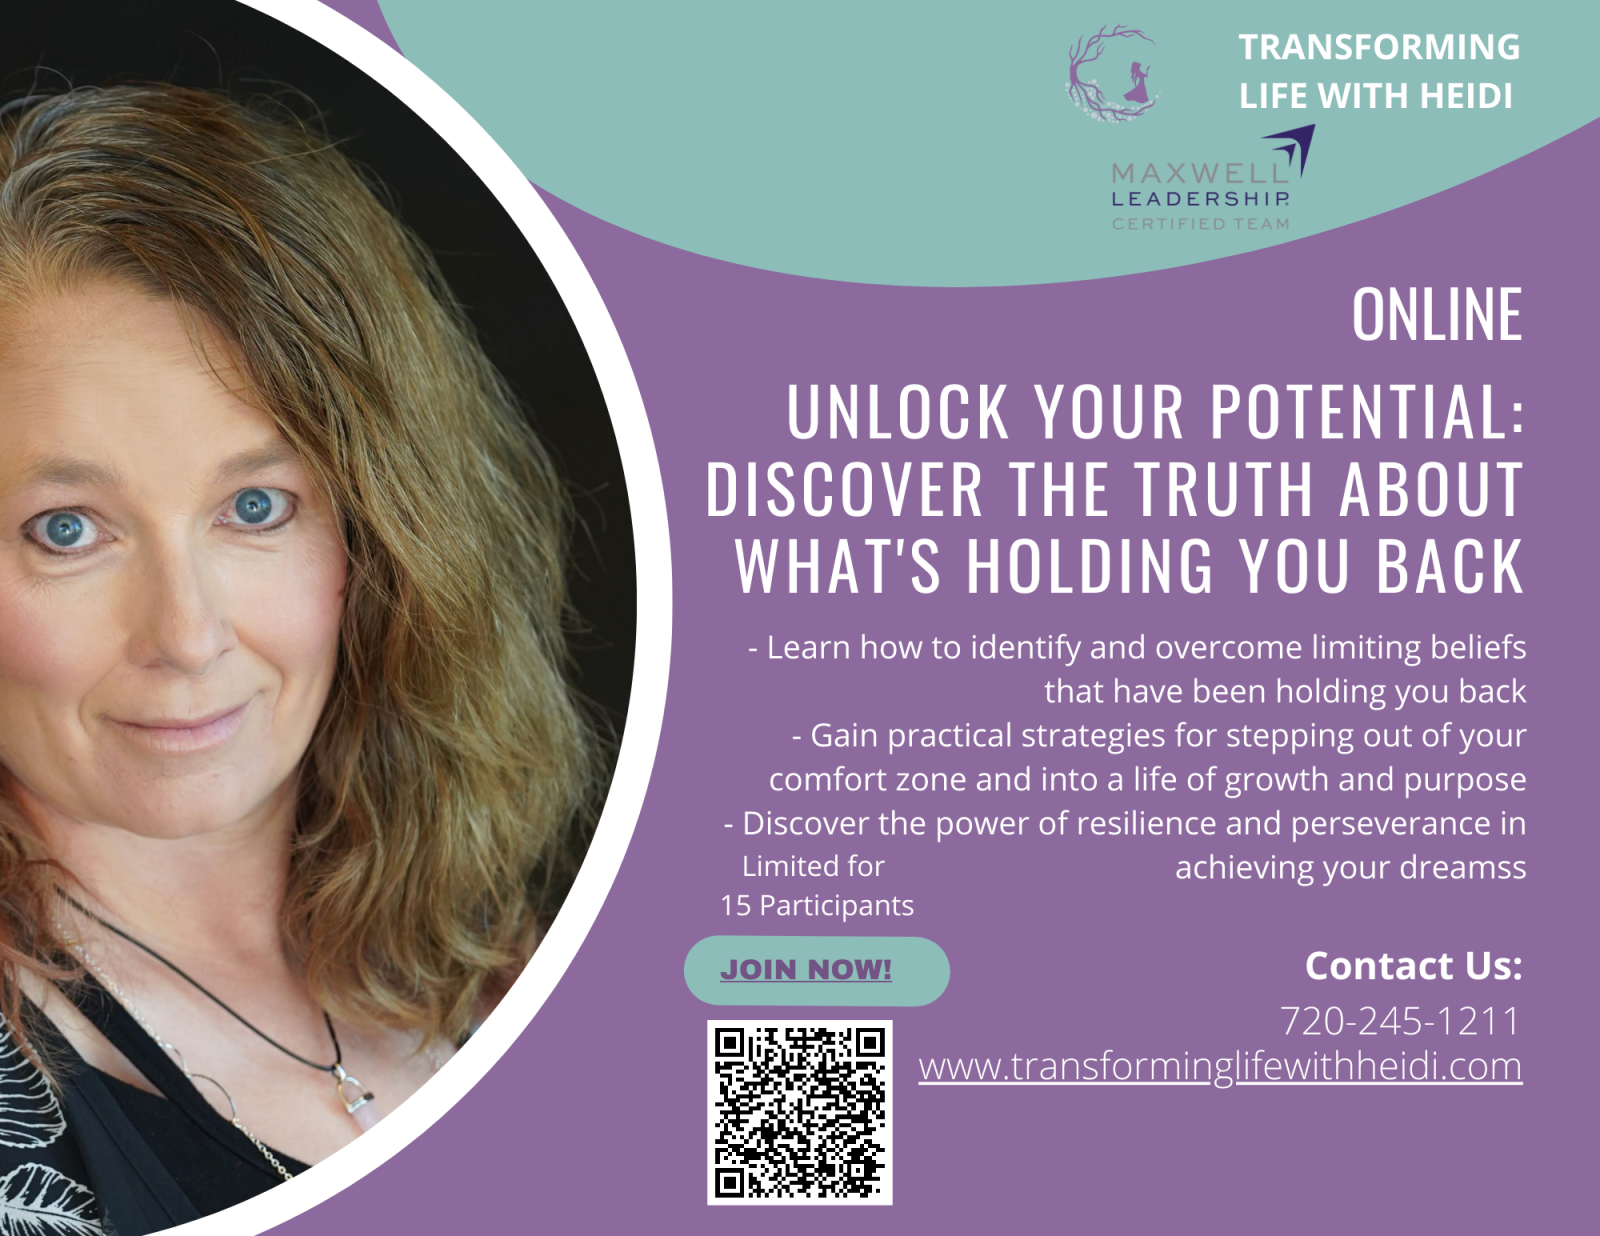 Unlock Your Potential: Discover the Truth About What's Holding You Back